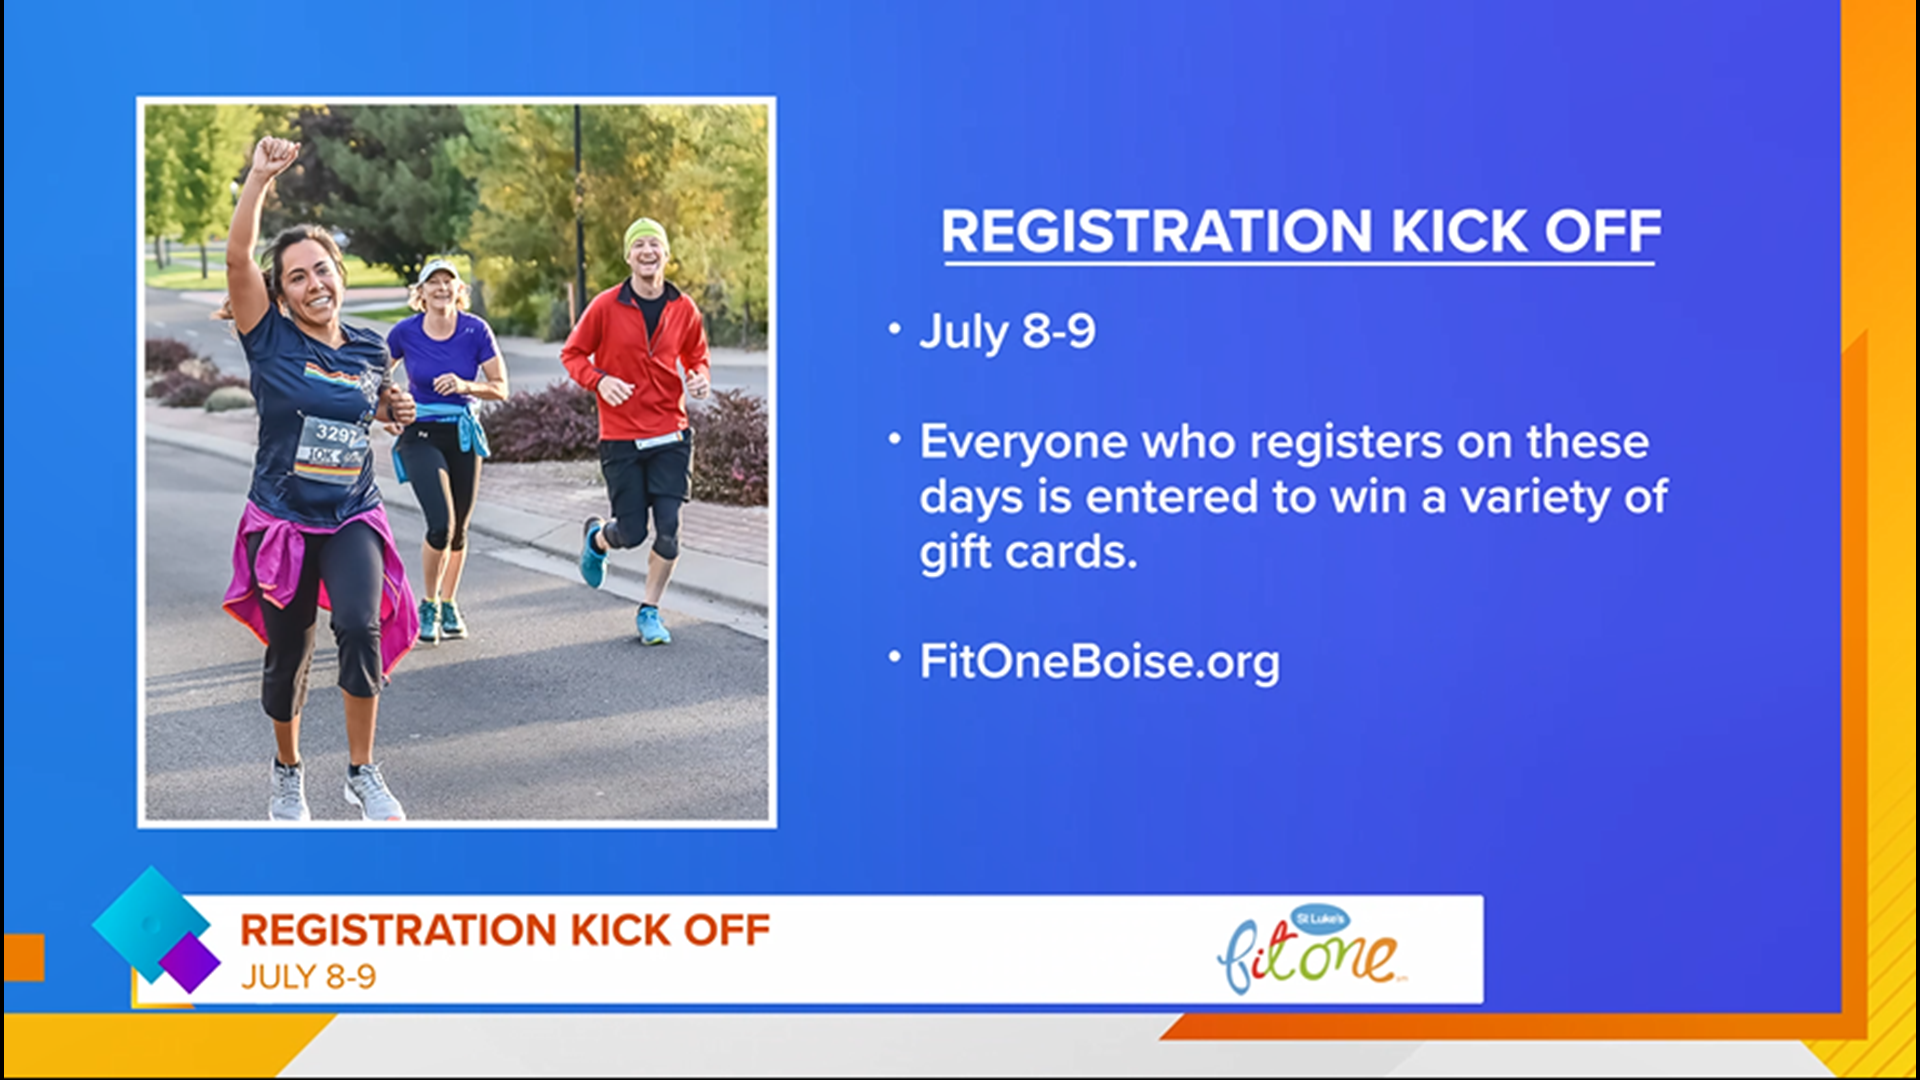 Registration kick off event for Fit One has moved to July 8-9, open to everyone and you can create your own race or participate in the 5K, 10K, or half marathon